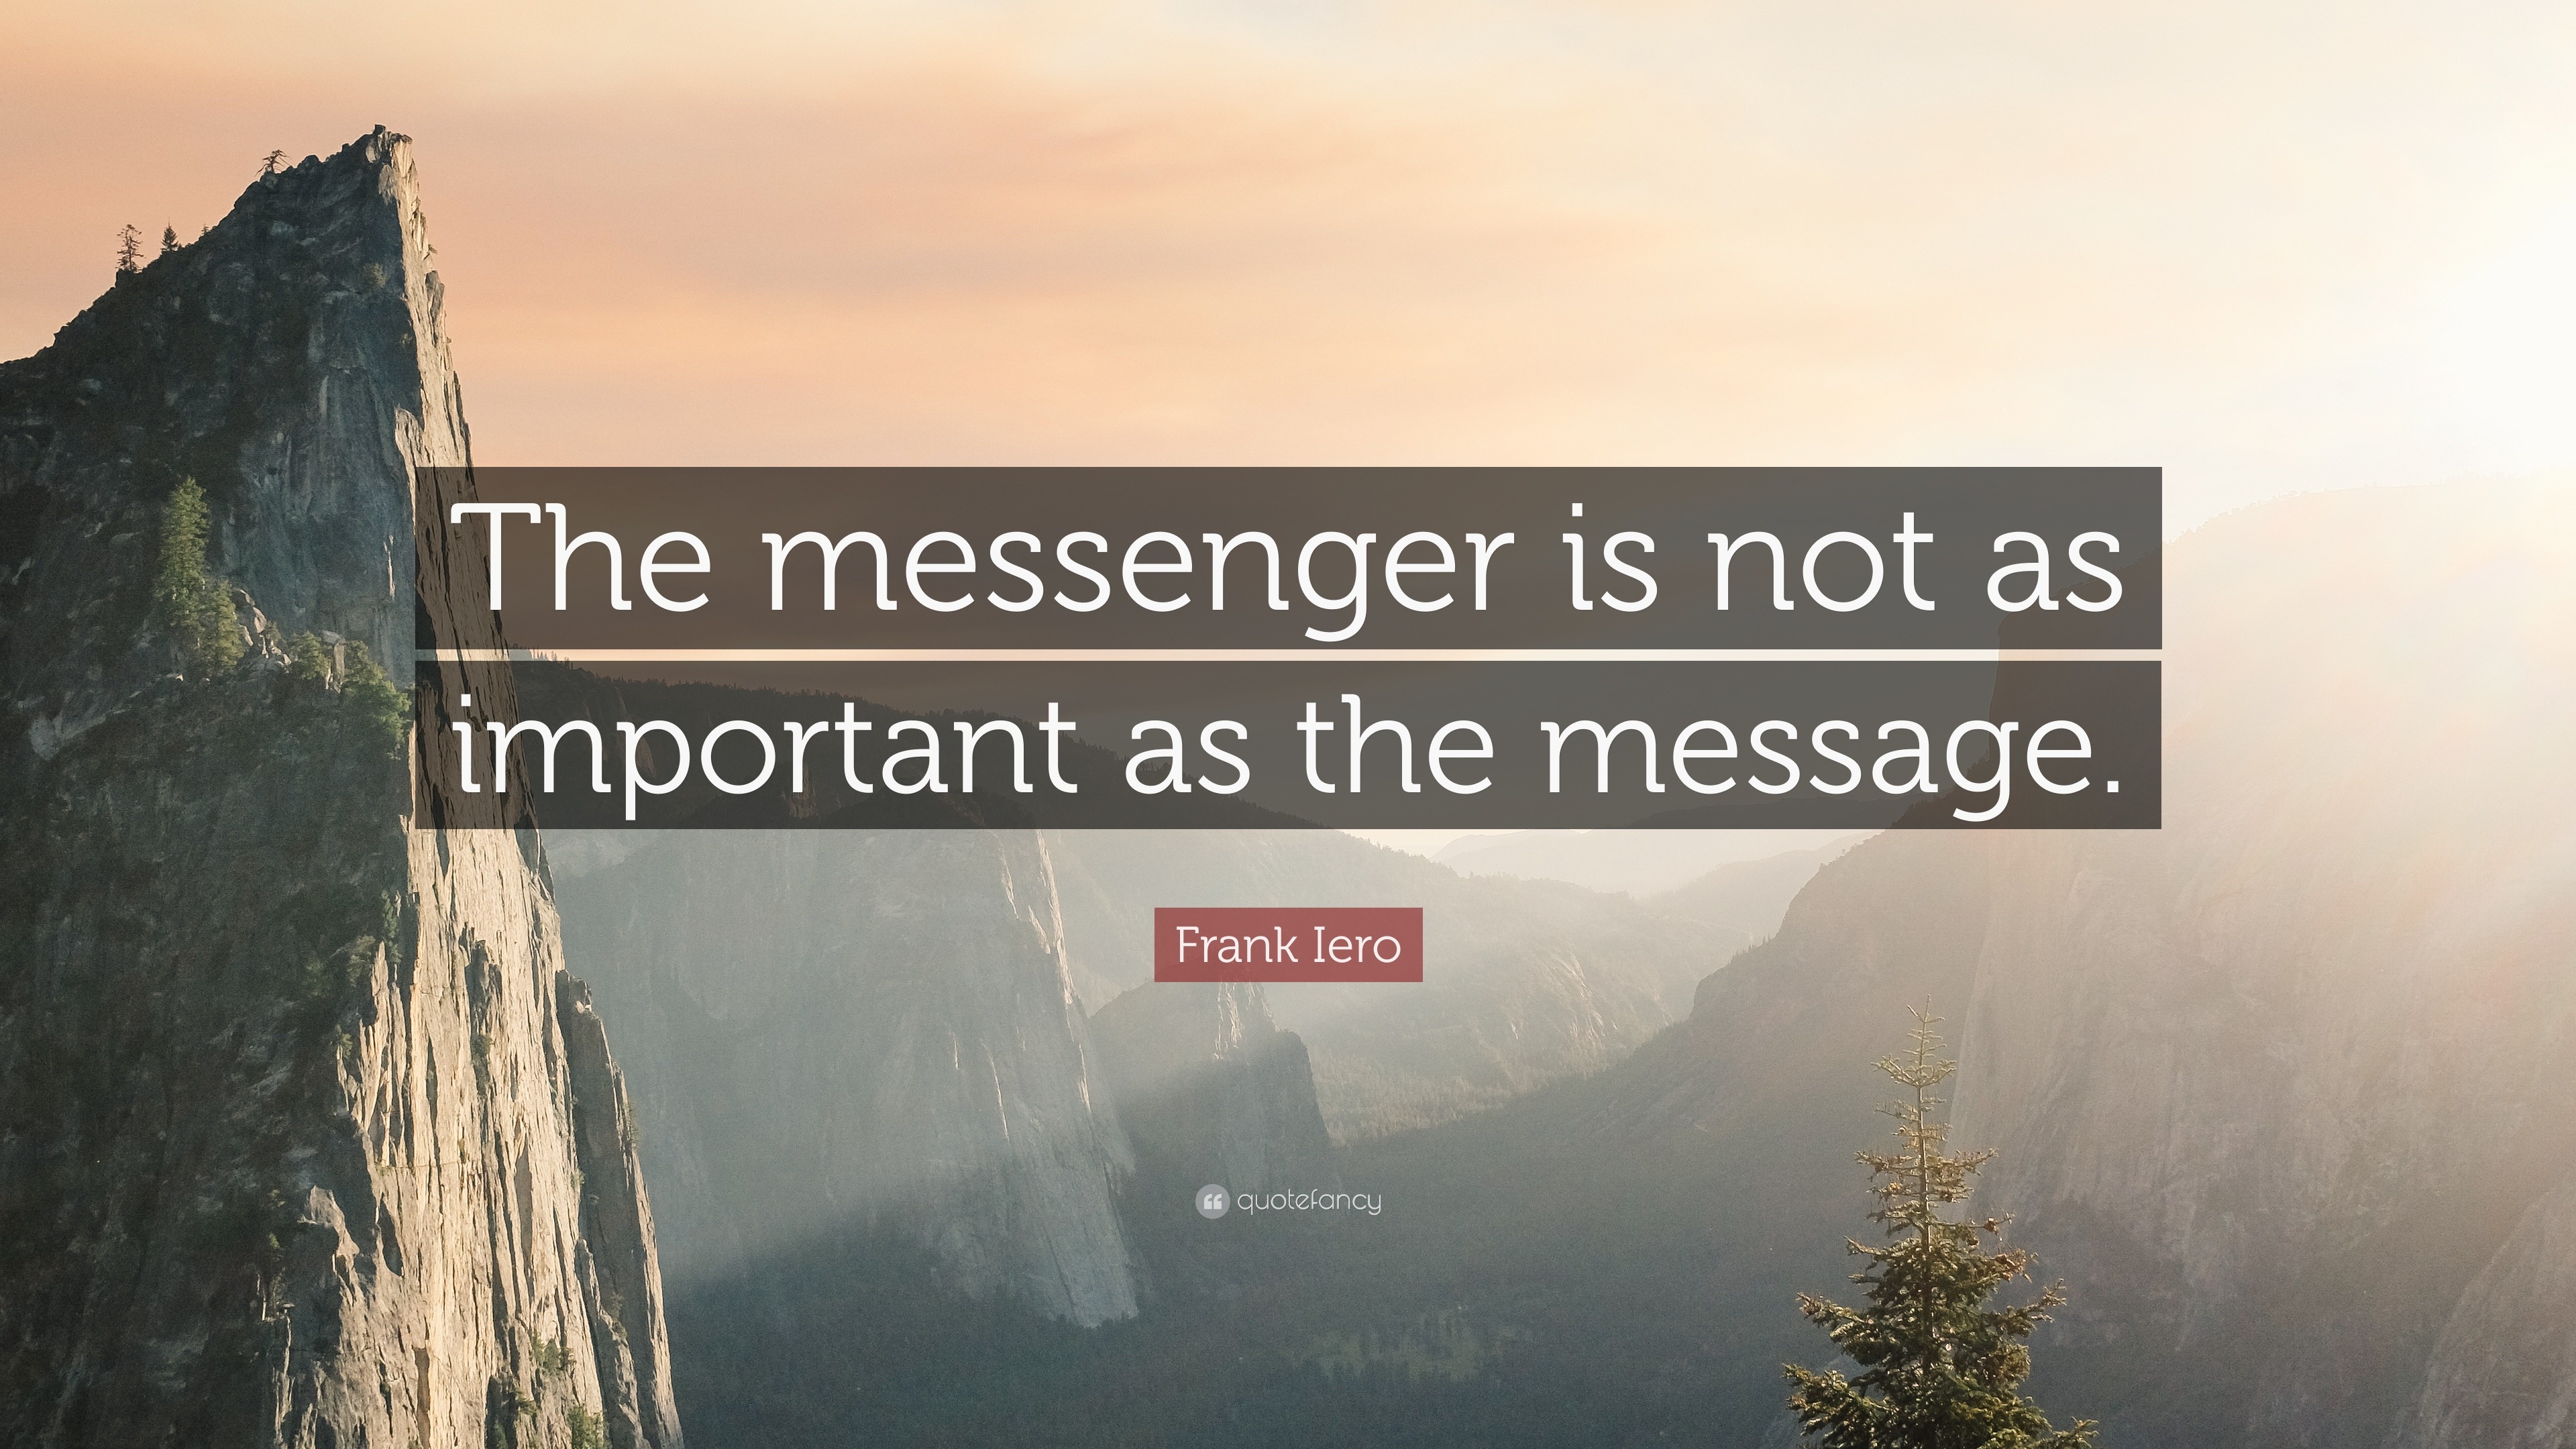 Frank Iero Quote: "The messenger is not as important as the message." (9 wallpapers) - Quotefancy